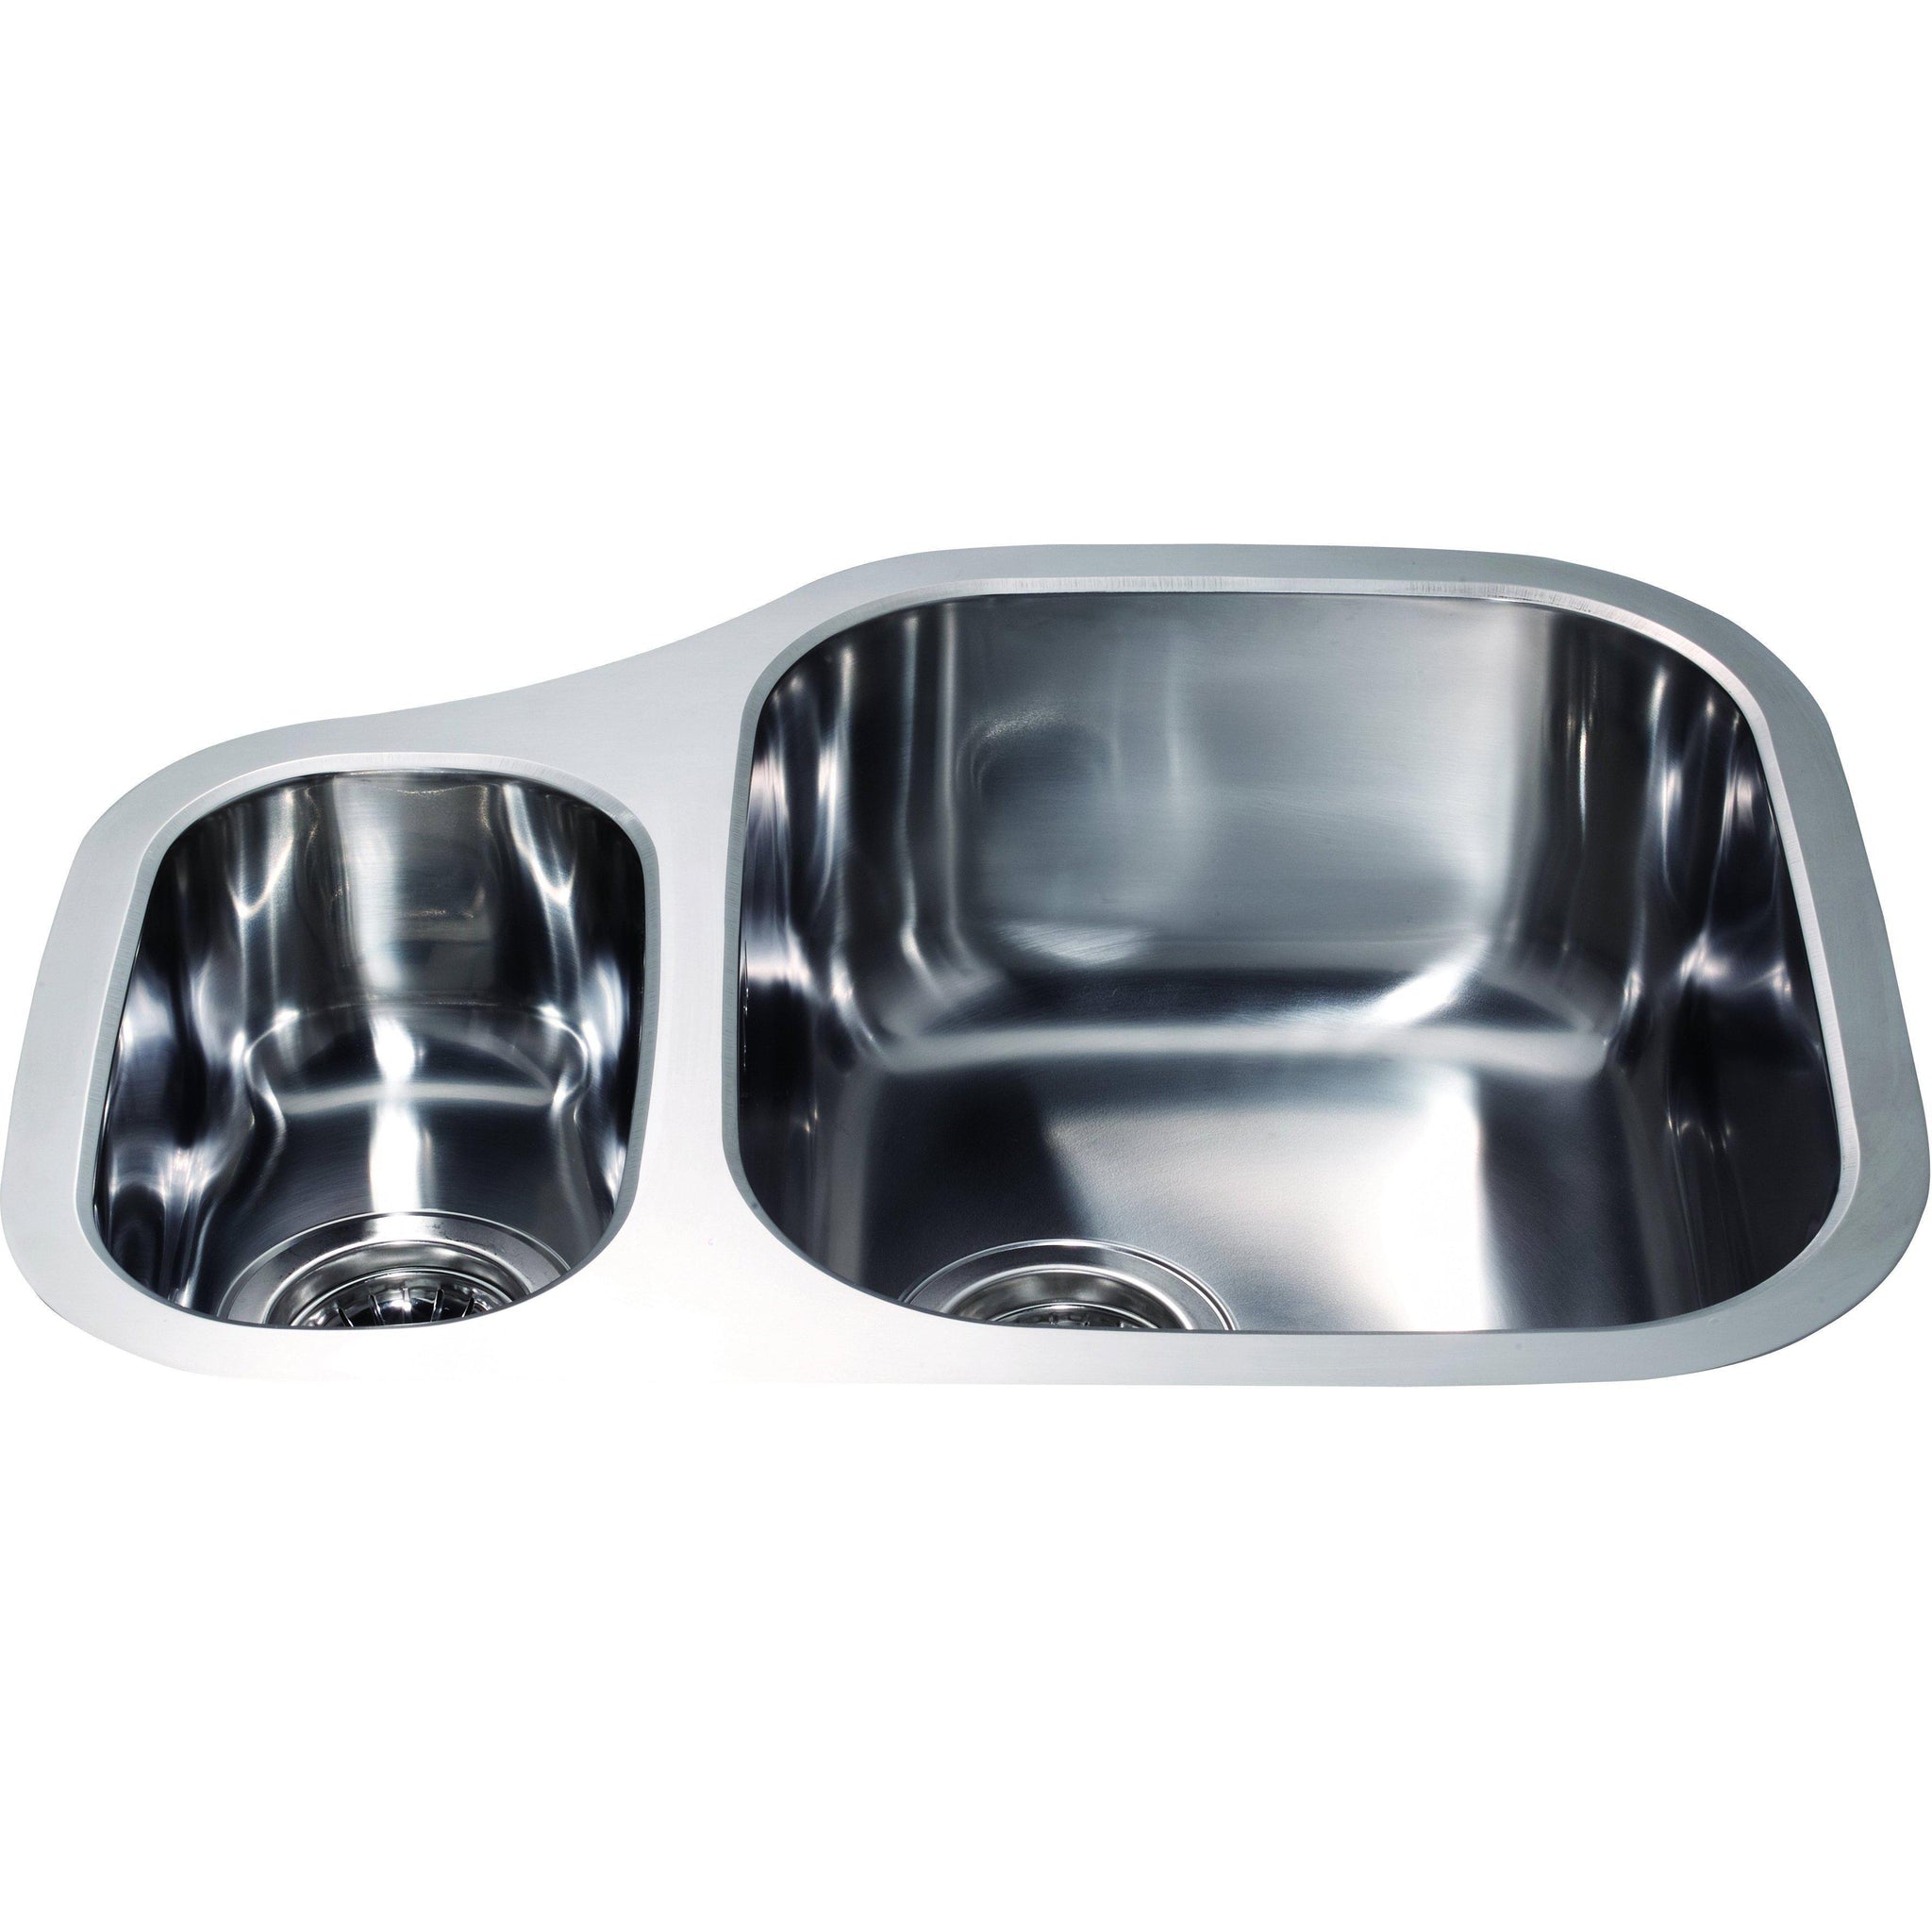 Cda Kcc27ss Undermount Curved 15 Bowl Sink Stainless Steel